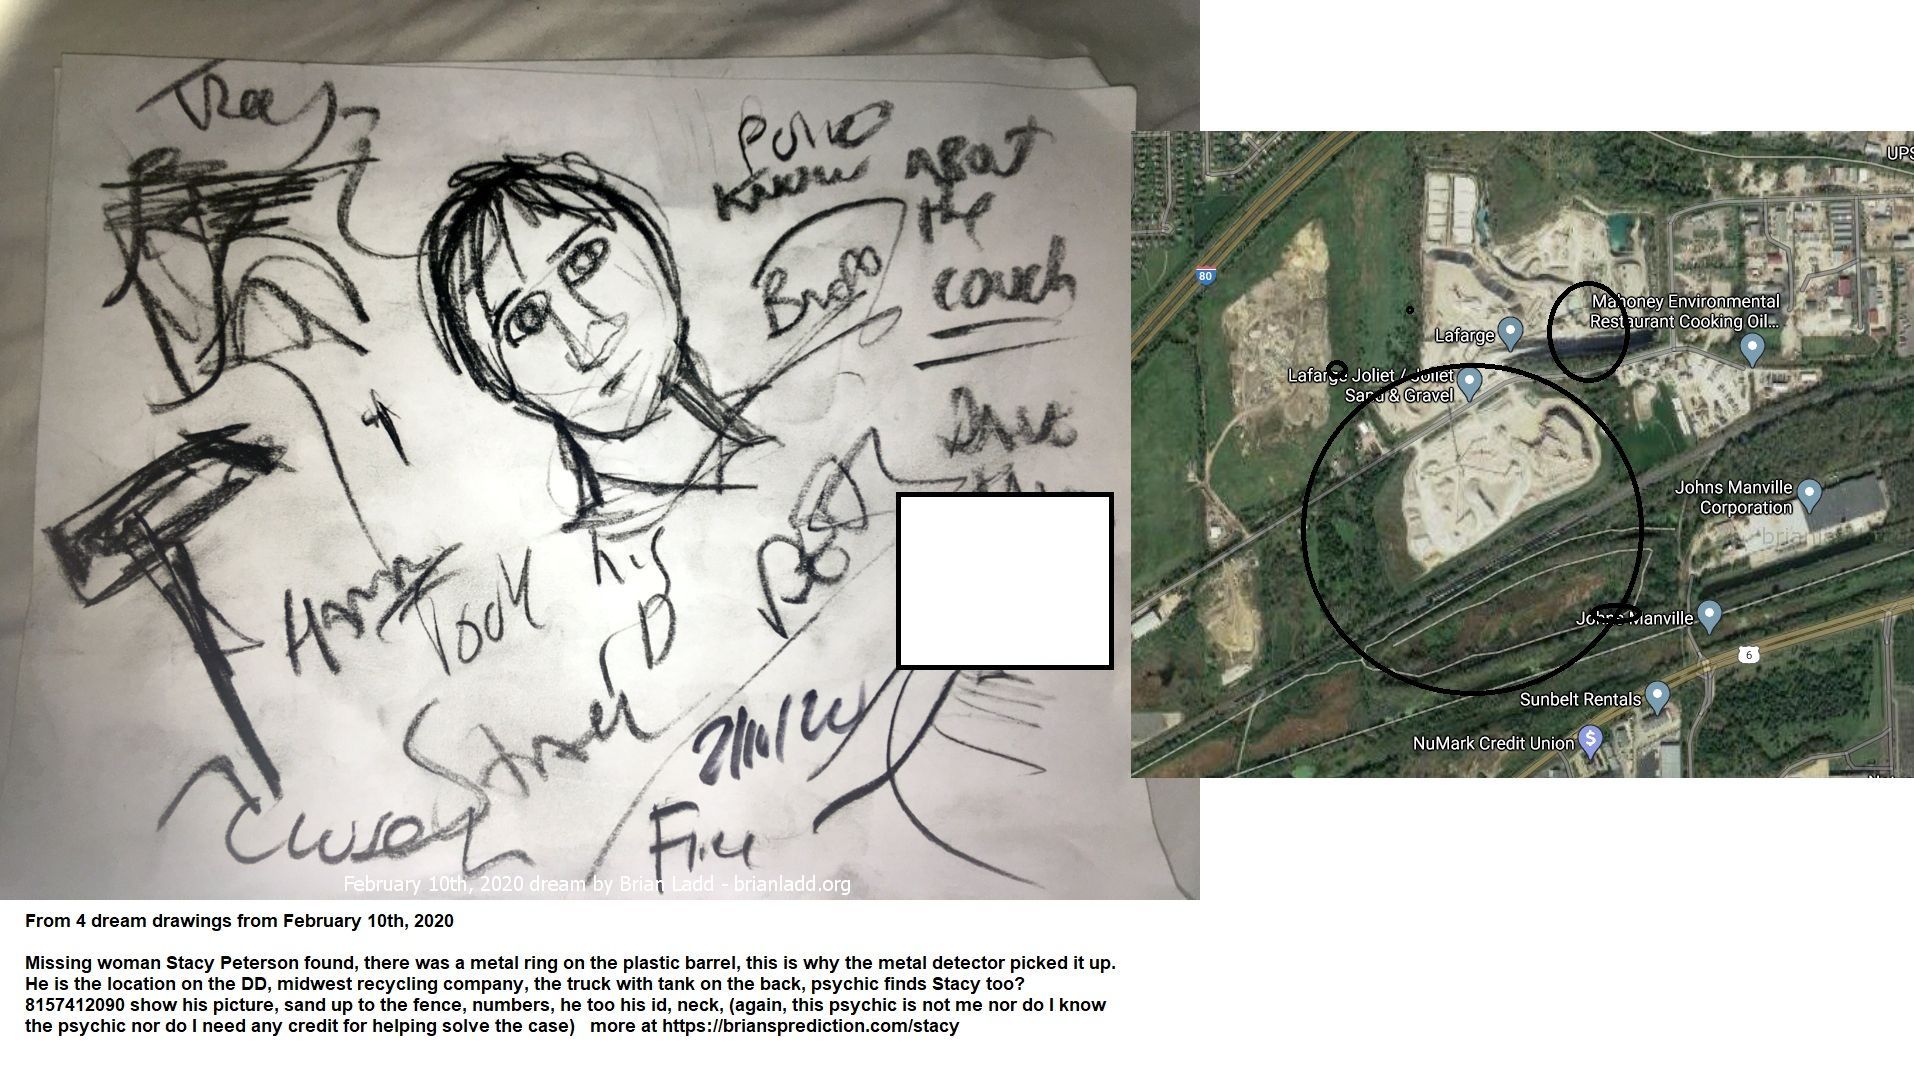 Missing Woman Stacy Peterson Found There Was A Metal Ring On The Plastic Barrel Midwest Recycling Company The Truck With...
From 4 Dream Drawings From February 10th, 2020  Missing Woman Stacy Peterson Found, There Was A Metal Ring On The Plastic Barrel, This Is Why The Metal Detector Picked It Up.  He Is The Location On The Dd, Midwest Recycling Company, The Truck With Tank On The Back, Psychic Finds Stacy Too? 8157412090 Show His Picture, Sand Up To The Fence, Numbers, He Too His Id, Neck, (again, This Psychic Is Not Me Nor Do I Know The Psychic Nor Do I Need Any Credit For Helping Solve The Case)  More At   https://briansprediction.com/Stacy  Cae Info  N Late October, Cities And Towns Around The Country Were All Tricked Out In Halloween Decorations. Up And Down The Neighborhoods, Families Prepared For Fright Night.  But This Year, The Village Of Bolingbrook, A Chicago Suburb, Was Plunged Into A Real-Life Mystery Far More Chilling Than Any Halloween Haunting Could Ever Be.  On Oct. 28, Stacy Peterson, 23 Years Old -- Wife, Mother, Sister -- Suddenly Vanished. She Went Missing And Is Yet To Be Found.  Her Husband Drew Said She'D Run Off With Another Man.  Drew Peterson: Iâ€™M Still In Love With Stacy And I Miss Her, So... (he Puts Up Hand And Walks Away)  But Her Family Suspected Foul Play And Launched A Massive Search.  Volunteers Combed Through Forests And Fields. Police Took To The Air And The Water.  Advertise  But It Wouldn'T Go Away. As The Days Dragged By With No Sign Of Stacy -- And No Word From Her Either -- The Questions Piled Up. So Did The Suspicions And The Speculation About The Role Of Stacyâ€™S Husband Drew. He Says All The Attention Forced Him To Speak Out.  Drew Peterson: Iâ€™M Really Being Portrayed As A Monster Here. Nobody'S Defending Me. Nobody'S Stepping Up To Say, "No, He'S A Decent Guy. He Helps People. He Does This. He Does That." So Somebody'S Got To Say Something.  Tonight We'Ll Hear From Drew Peterson, Along With Other Family Members And Friends, As We Try To Piece Together What Really Happened To Stacy Peterson.  Drew Peterson: I Don'T Believe She'S Missing. I Believe She'S Where She Wants To Be.  Drew Peterson Was One Of Bolingbrookâ€™S Finest -- A Police Sergeant With More Than Two Decades Of Experience -- When He Met Stacy In 2001. At The Time Peterson Was 47 Years Old. Stacy, A High-School Graduate, Was Just 17 -- 30 Years His Junior.  Hoda Kotb: I Know People Said, "Whatâ€™s Going On There?&Quot;  Drew Peterson: Sure.  But Peterson Says He Squared The Age Gap With Stacy.  Drew Peterson: I Said, "Do You Mind That Iâ€™M 47?&Quot; And She Goes, "Do You Mind That Iâ€™M 17?&Quot; Just Like, Kind Of Like, A Weird Feeling. But I-- She Was Beautiful. And It Was Exciting Having A Young, Beautiful Woman Interested In Me. And I Pursued The Relationship.  And, He Says, Stacy Did Too.  Drew Peterson: Every Time I Tried To Get Out Of The Relationship, She Would Pursue Me. Leaving Little Roses And Notes On My Car And Stuff. So It Was Like It Was Exciting. So--  Hoda Kotb: So Was It Love Like That?  Drew Peterson: Pretty Quick. Pretty Quick. So--  Hoda Kotb: So The Relationship Started. She Was Like A Kid, I Mean, In A Way. Just Very Naive.  Drew Peterson: Well. She Was Very Mature For Her Age In A Lot Of Senses Because She Had A Very Tough Upbringing.  Stacy Ann Cales Was The Third Of Five Children Born To Anthony And Christie Cales. Two Siblings Died Young. Court Records Show That Stacyâ€™S Mom Was In And Out Of Trouble With The Law. Her Mother Took Off For Good In 1998 And Her Dad Began Moving The Family.
